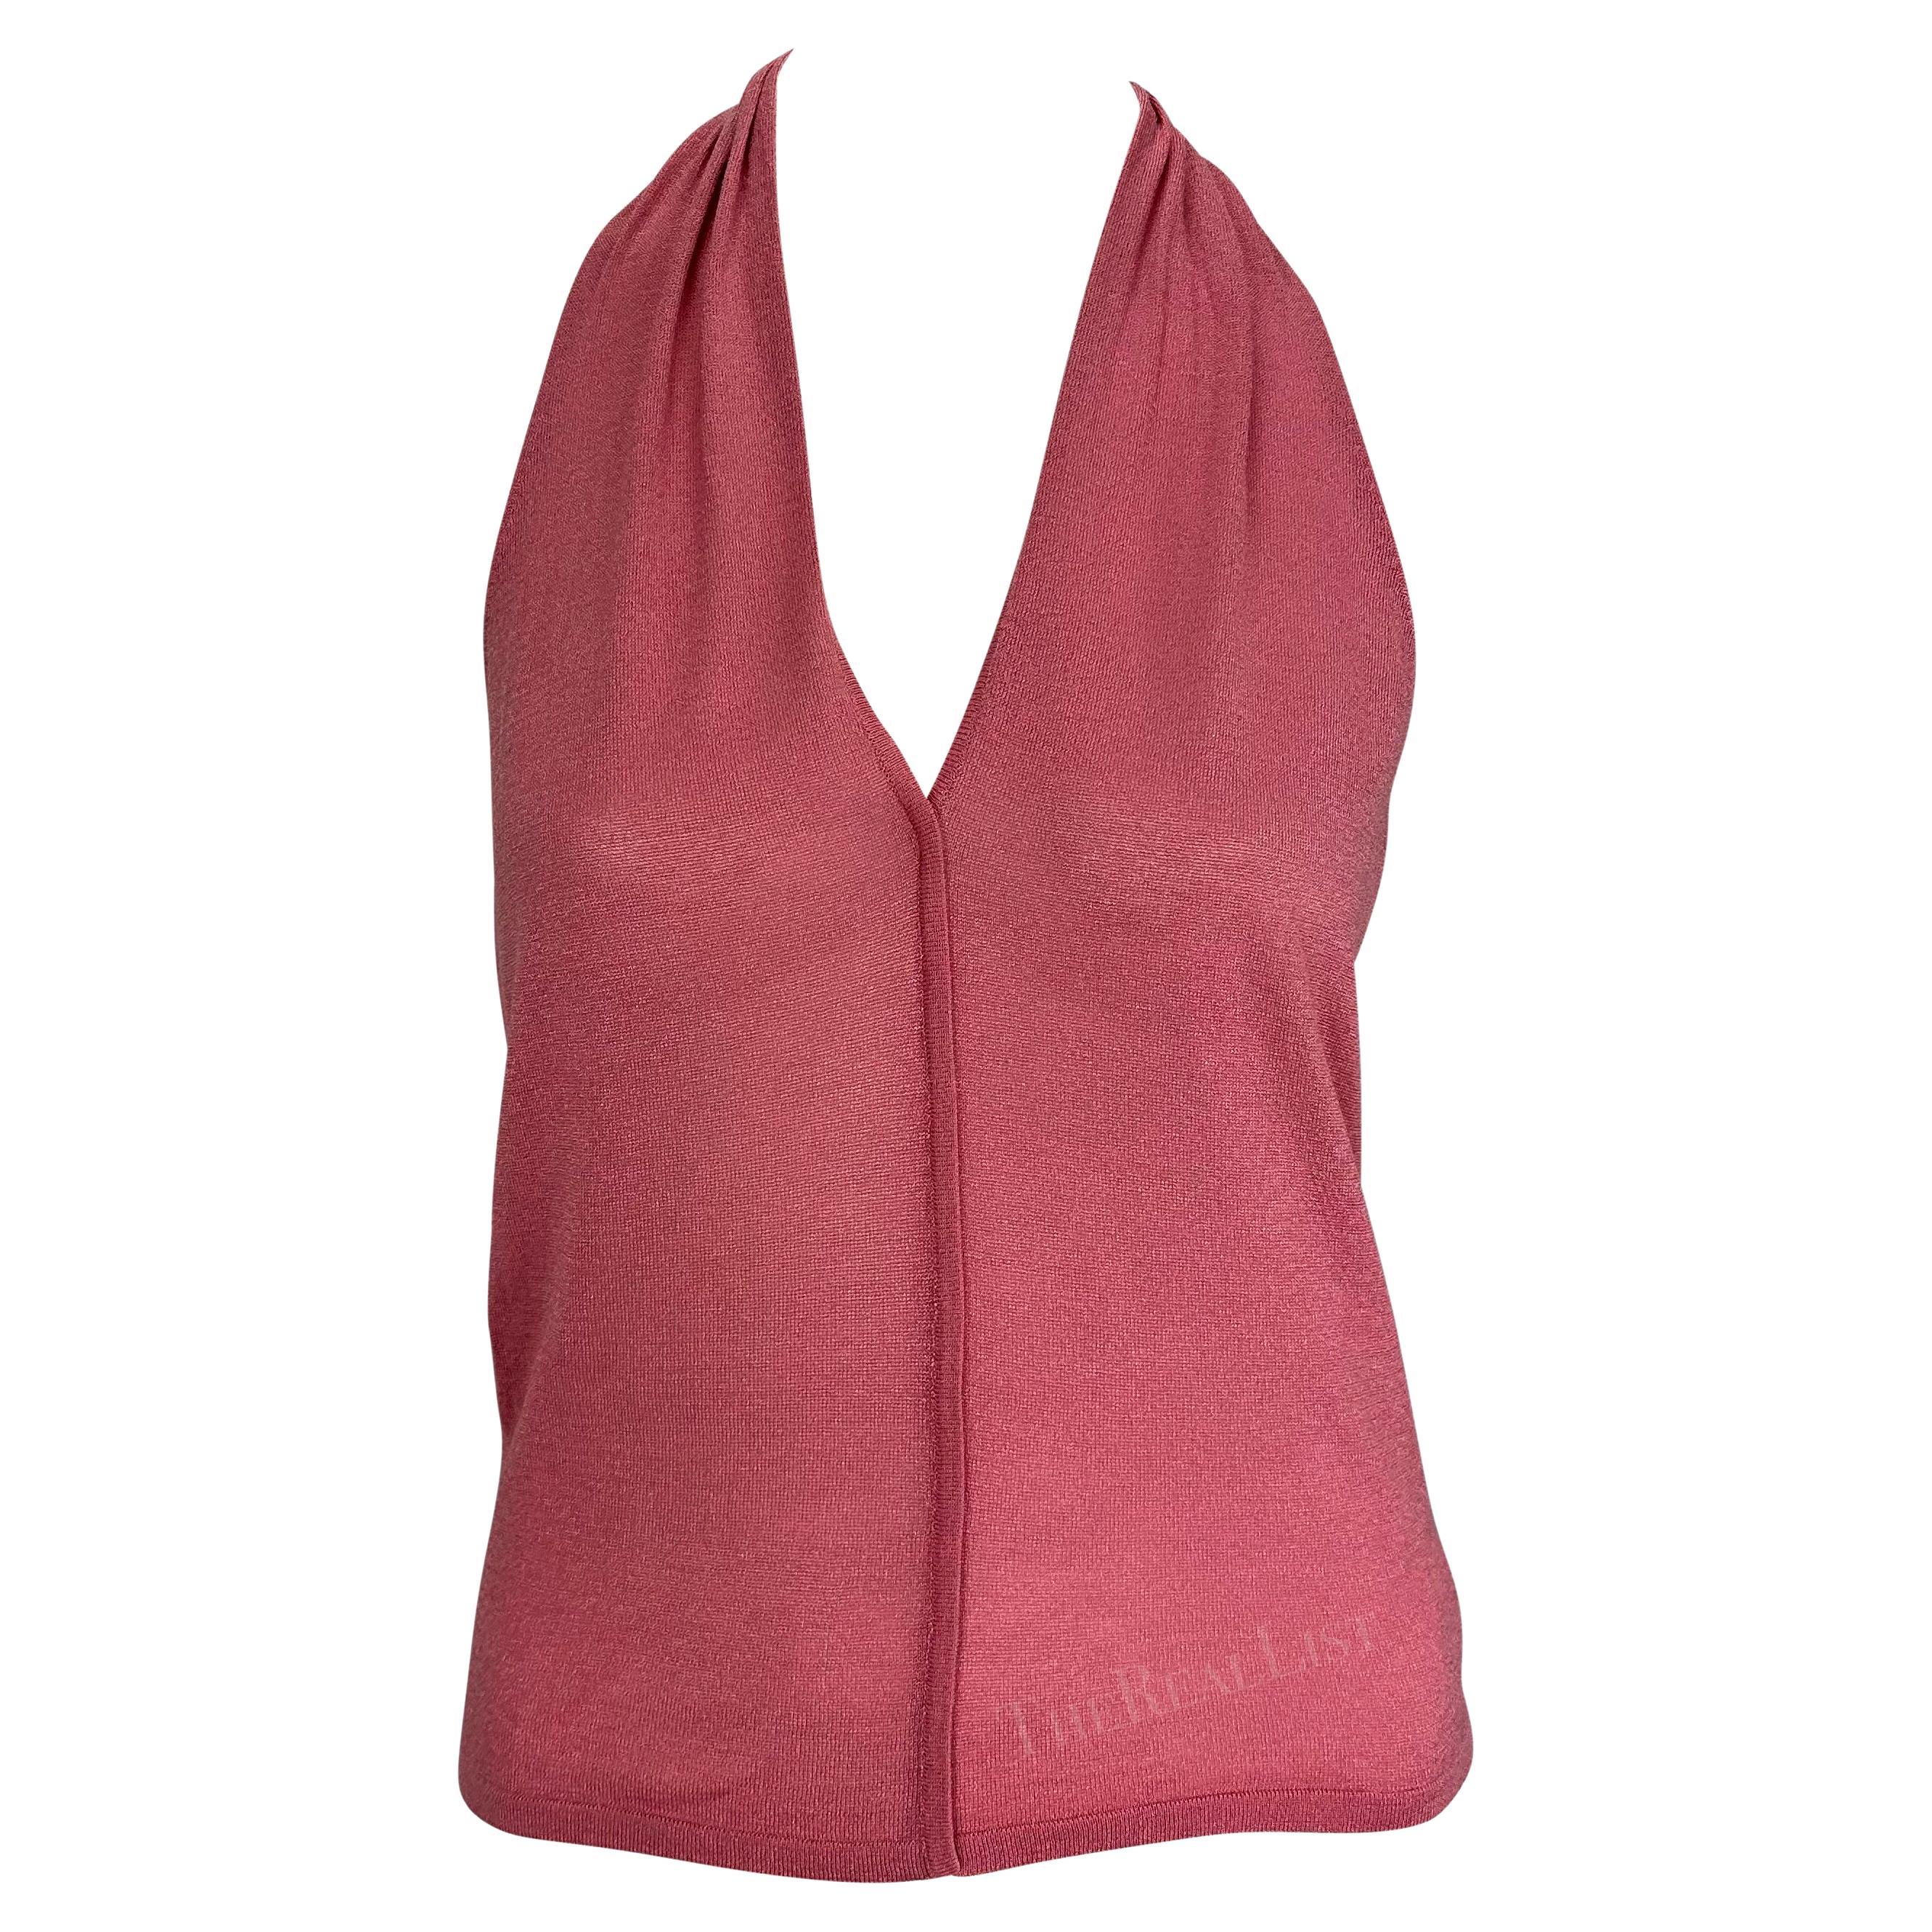 NWT 2000s Gucci by Tom Ford Pink Sheer Knit Halter Neck Tie Backless Top In Excellent Condition For Sale In West Hollywood, CA